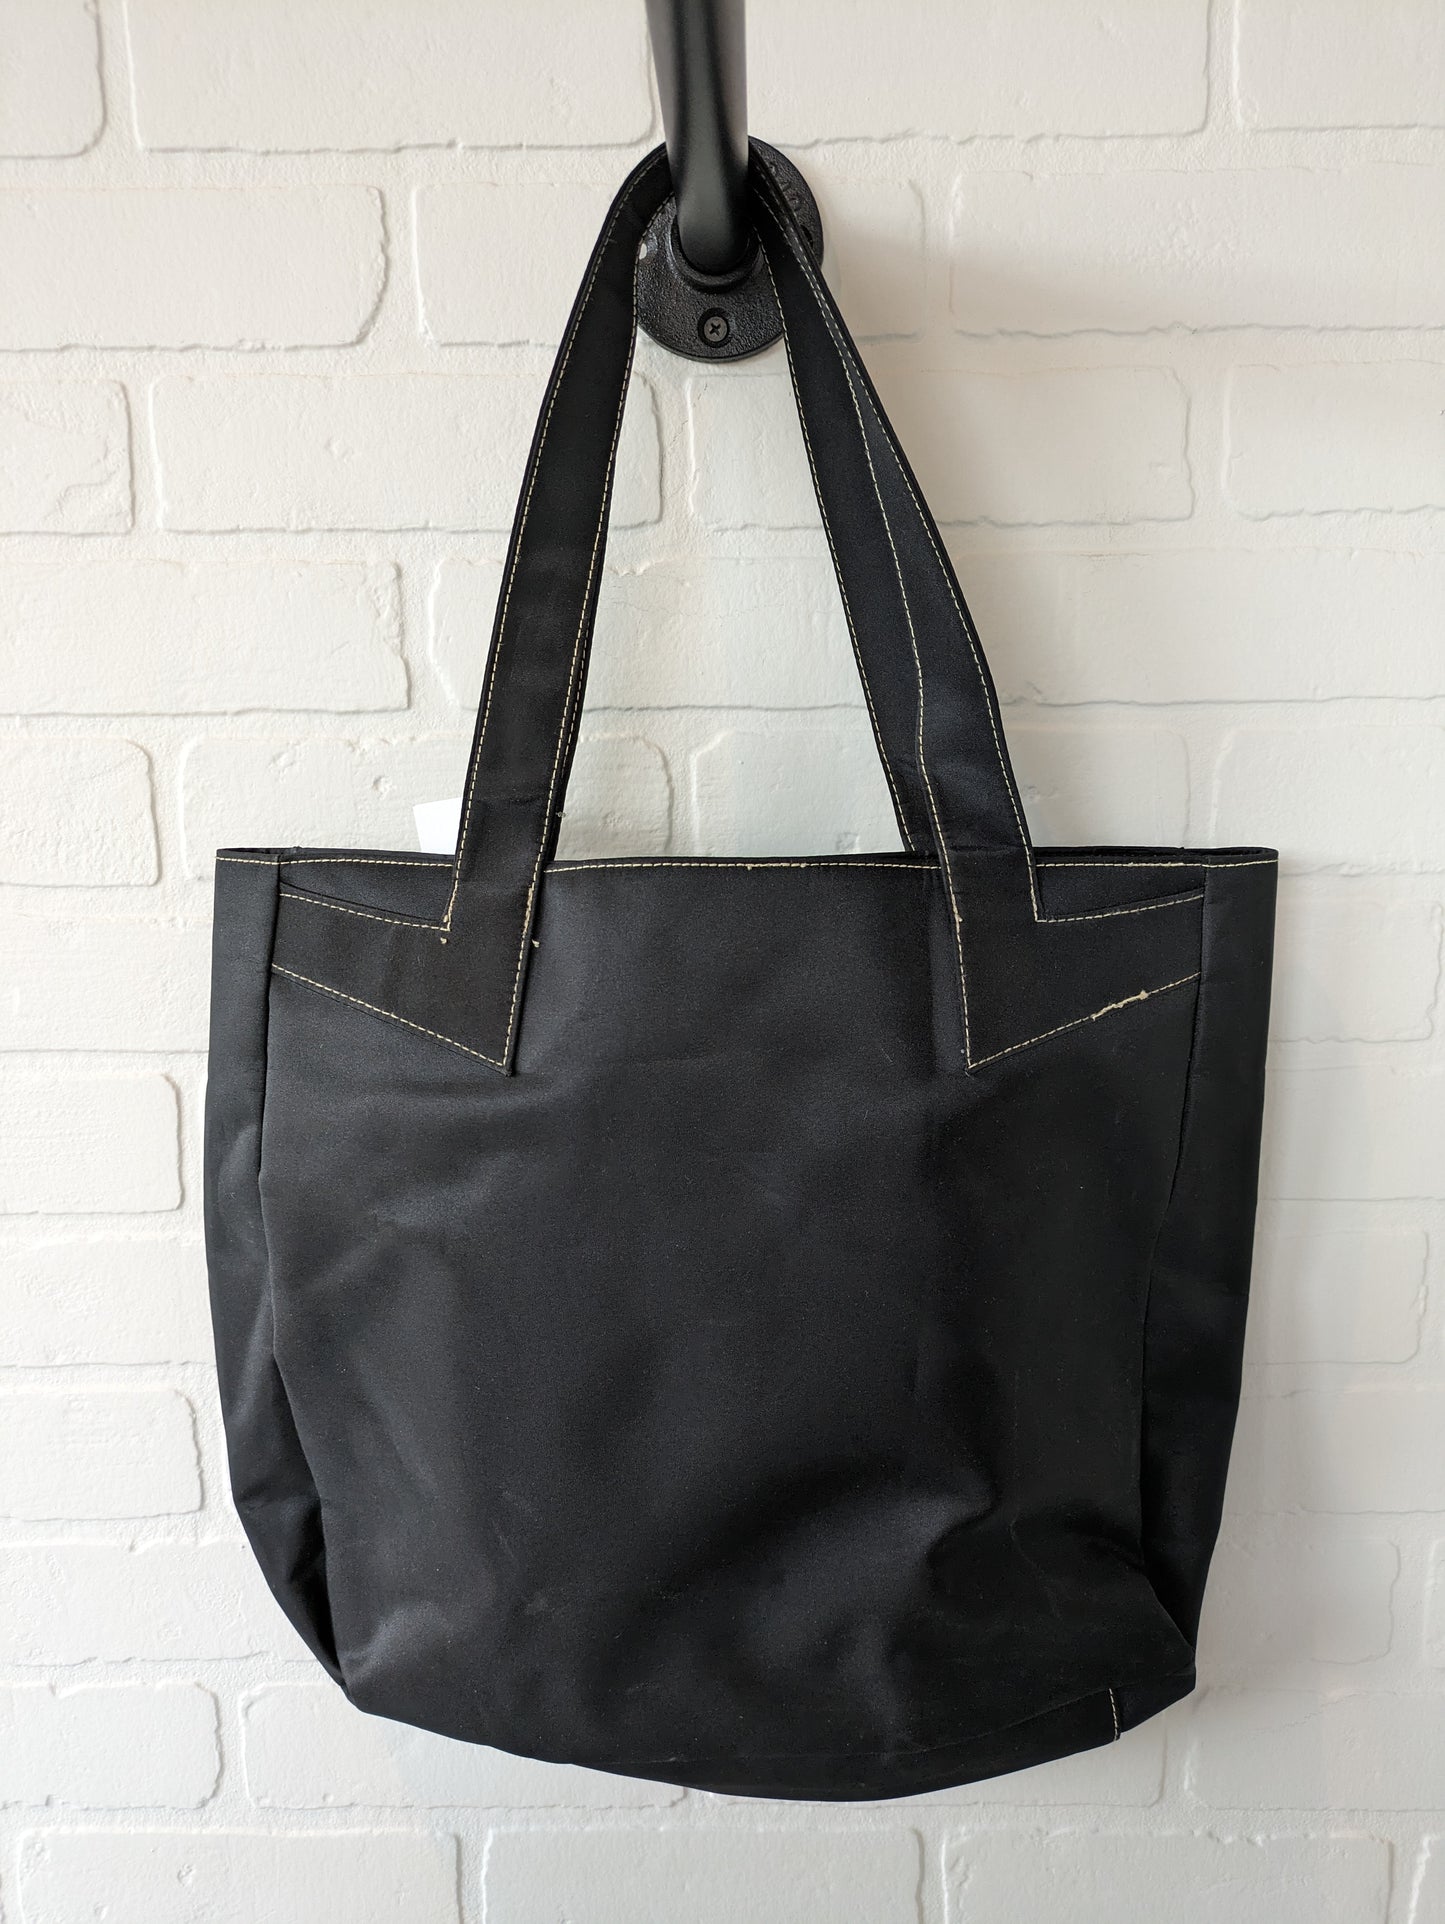 Tote By True Religion  Size: Large